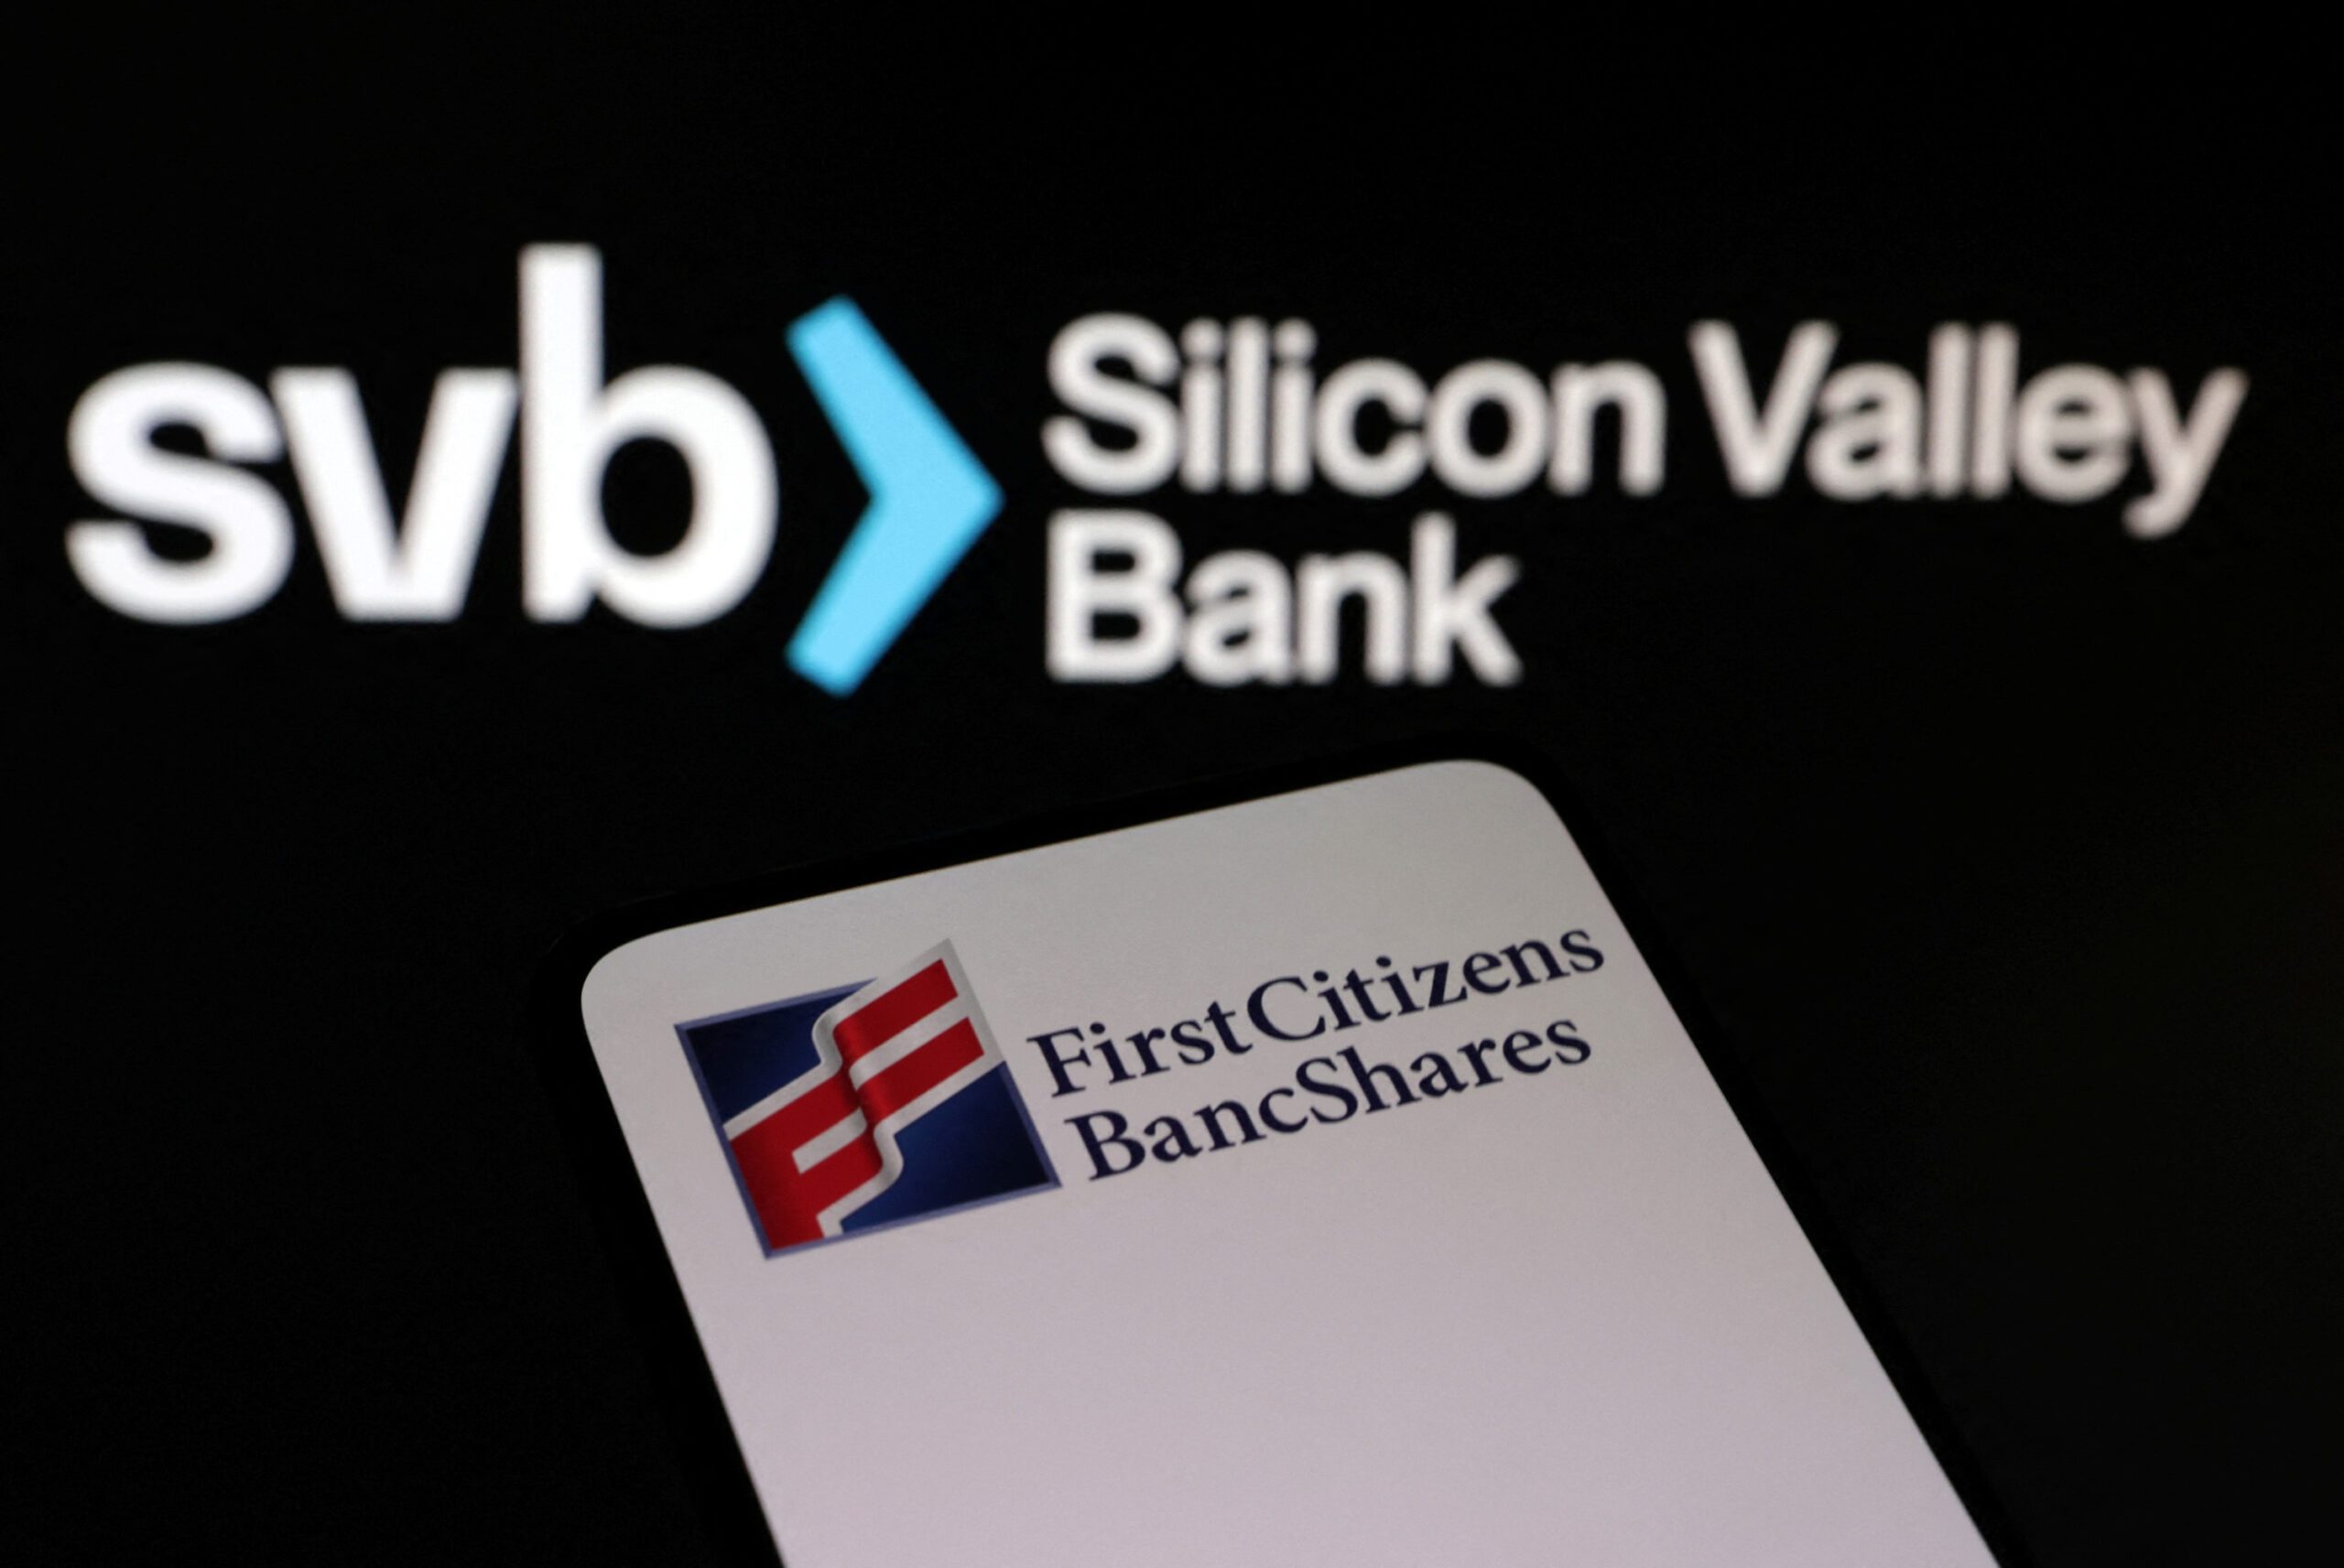 First Citizens agrees to acquire failed Silicon Valley Bank